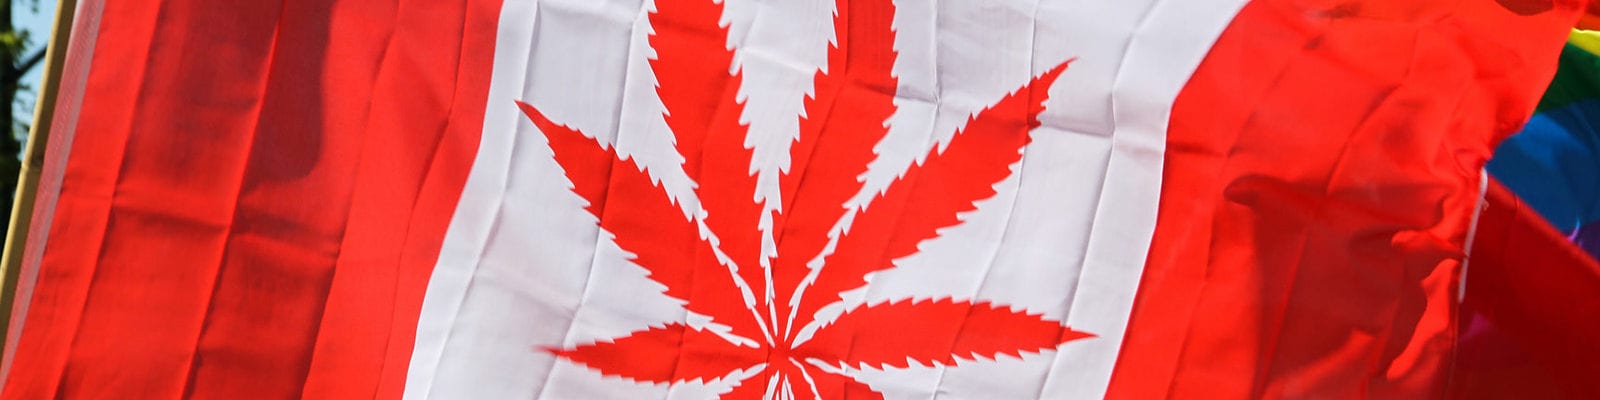 Canada's flag with a cannabis leaf shape instead of the usual maple leaf.